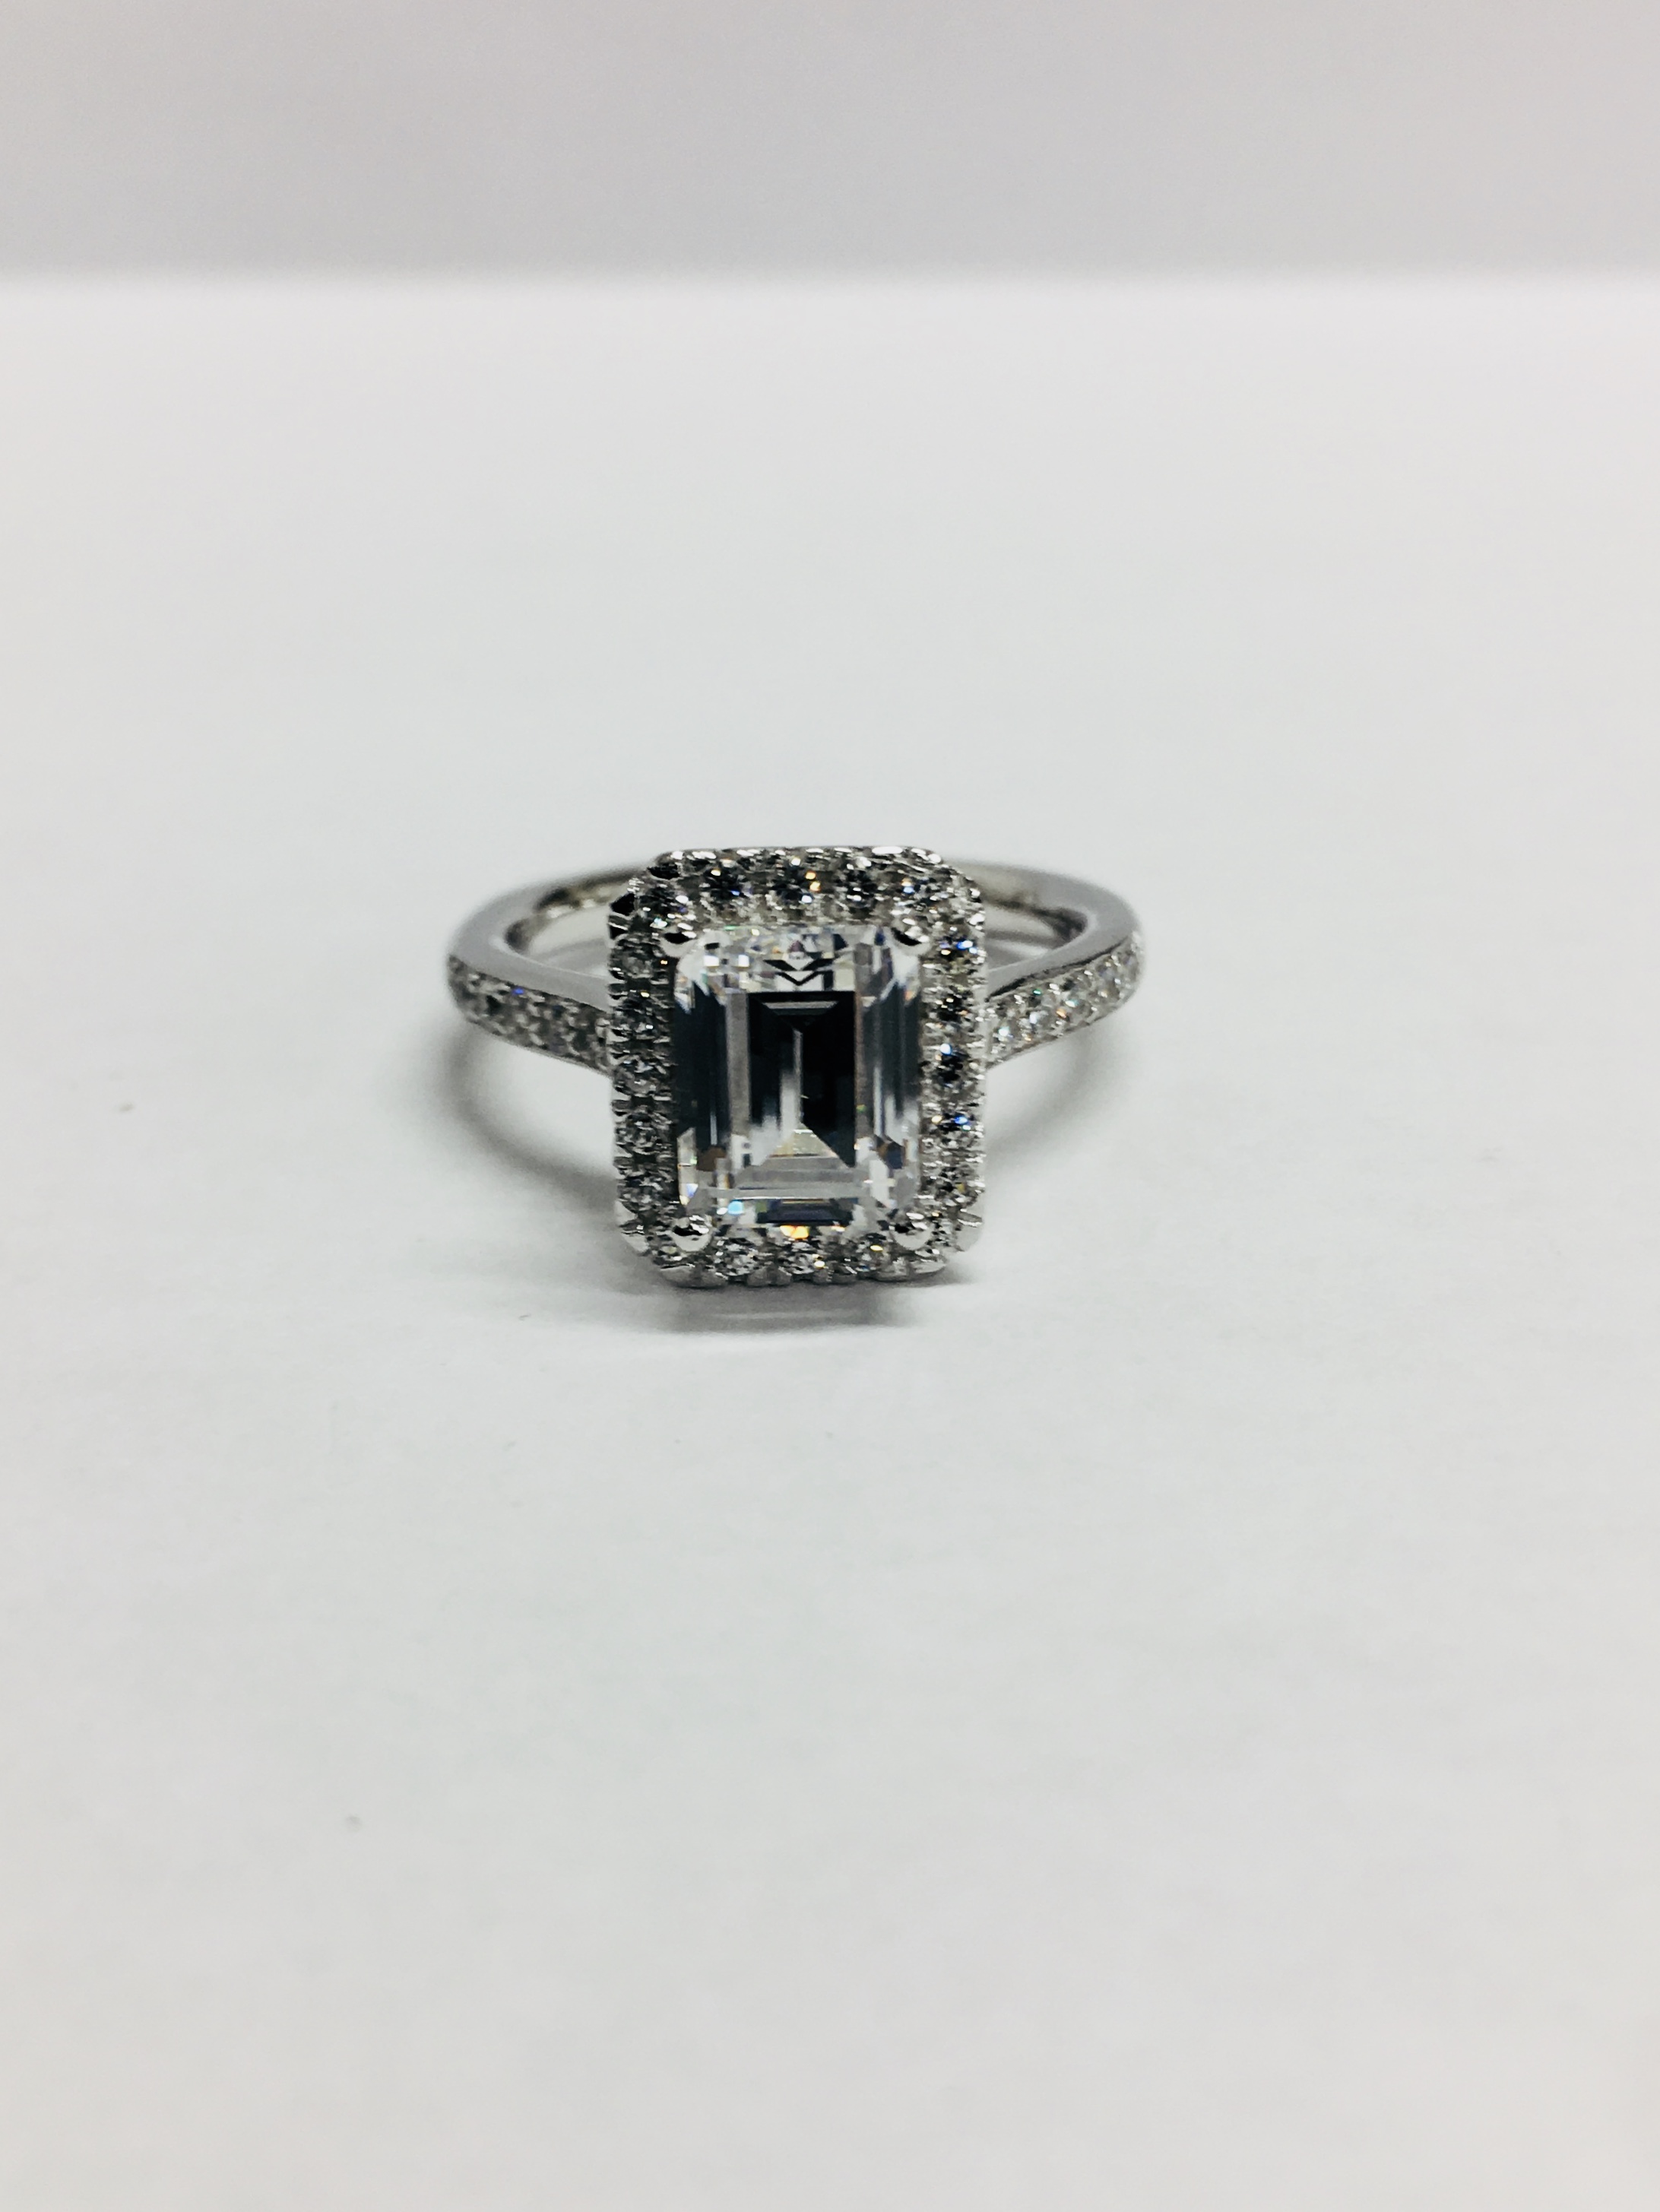 1.2ct diamond solitaire ring set with an emerald cut diamond